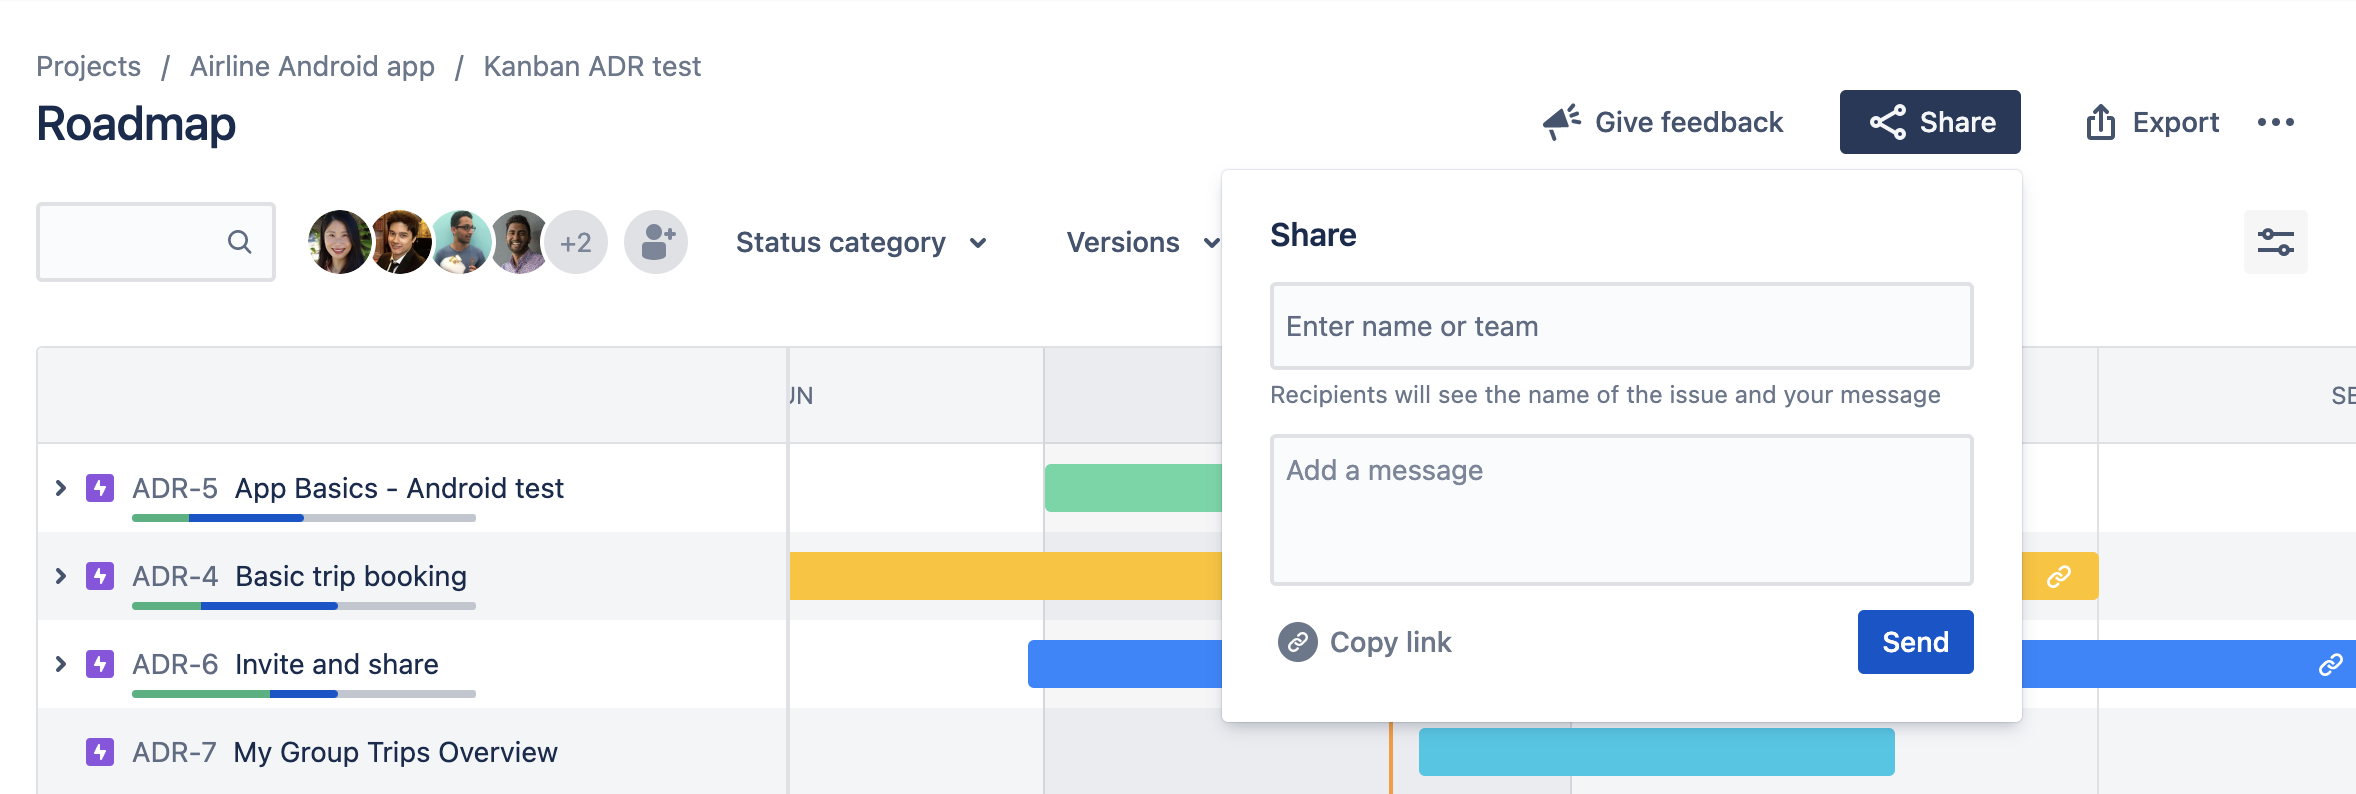 Share button within Roadmaps